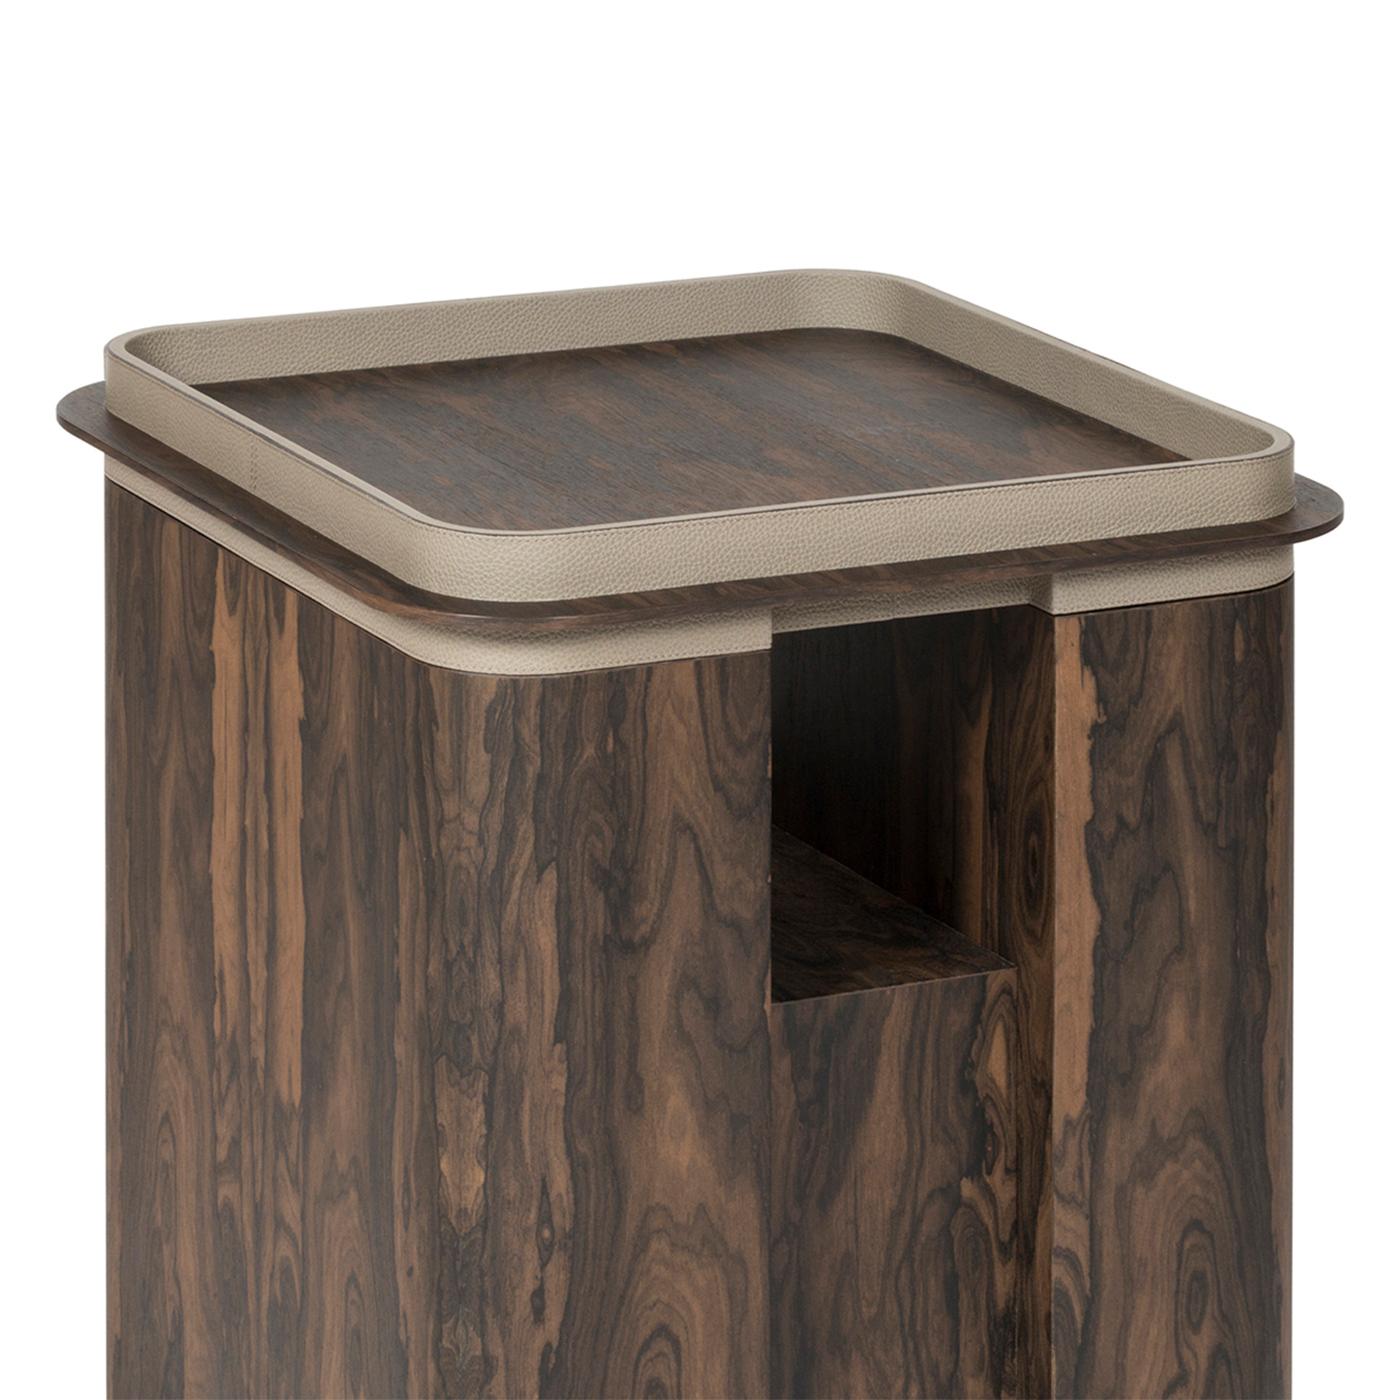 Side table walnut smart high with structure
In solid walnut wood. With walnut top surrounded 
With genuine beige leather.